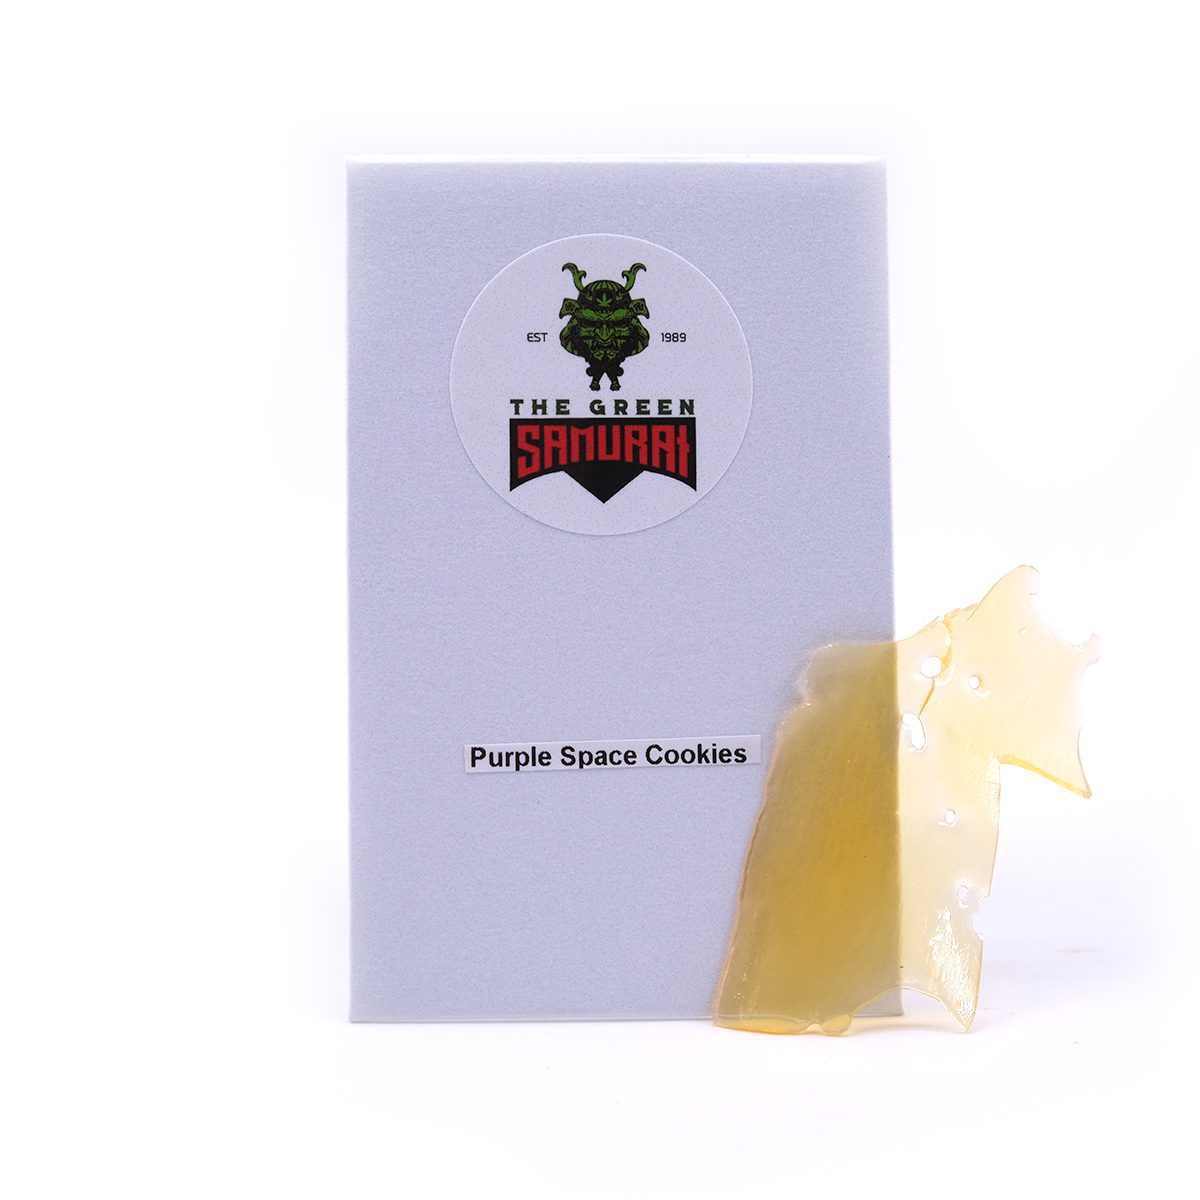 Buy Purple Space Cookies Shatter By The Green Samurai